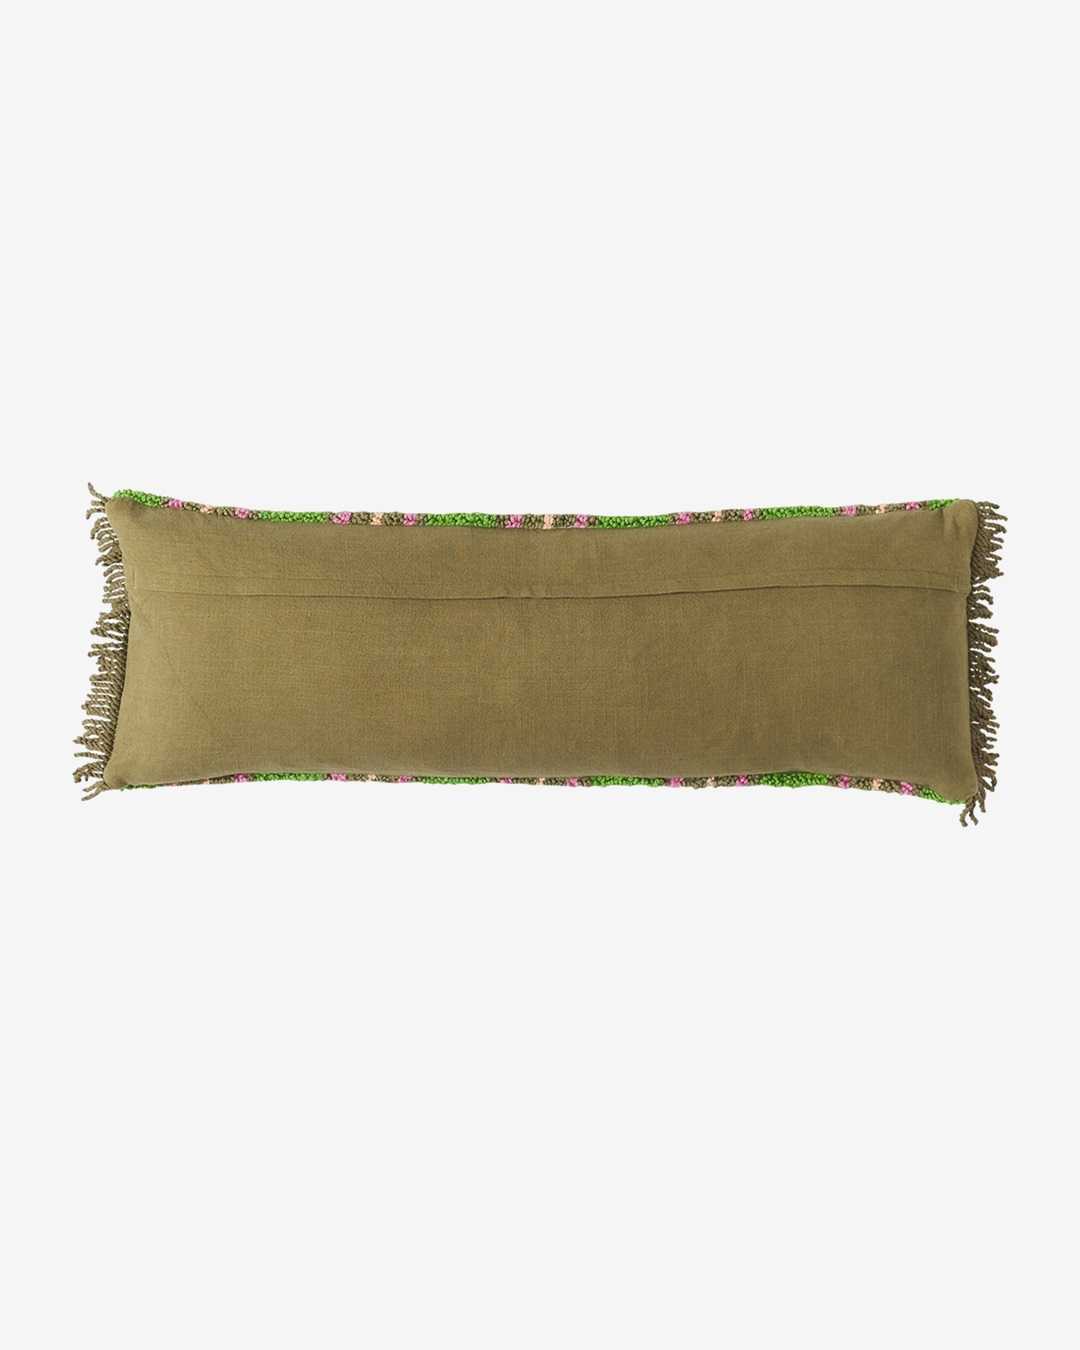 Green and pink stripe rectangle cushion with fringe